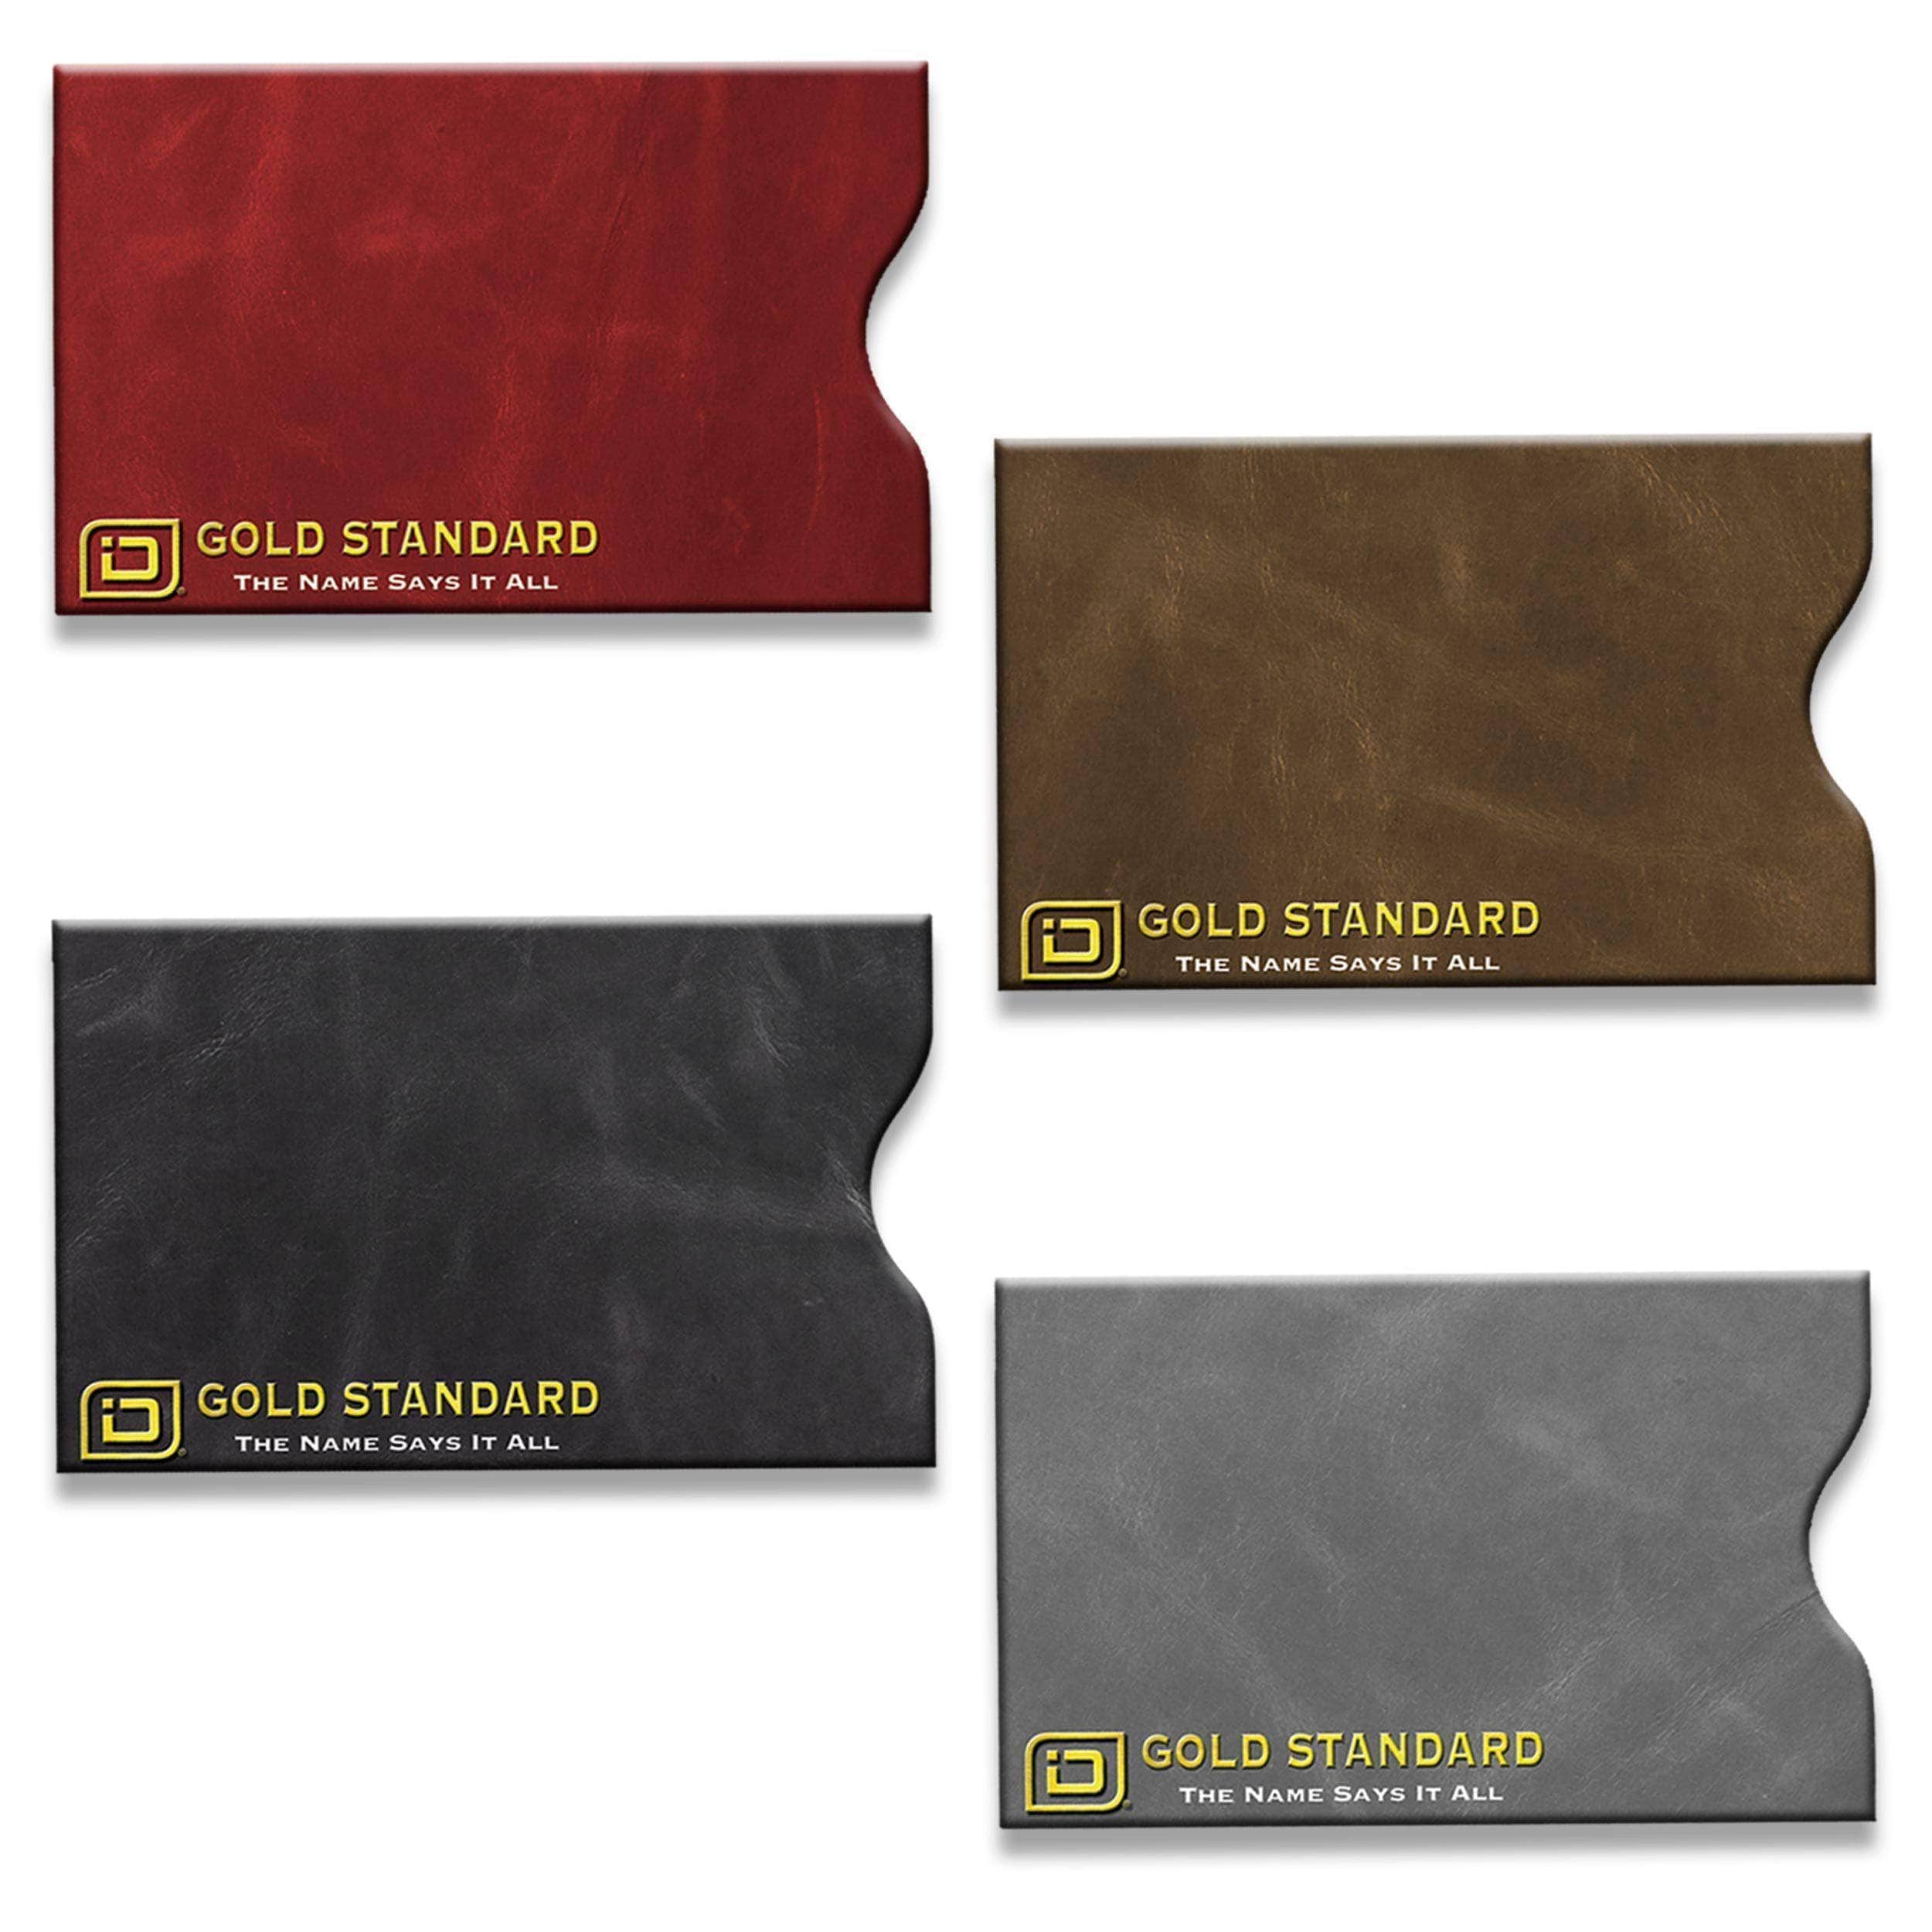 ID Stronghold  Gold Leather-Look RFID Sleeves 8 Pack